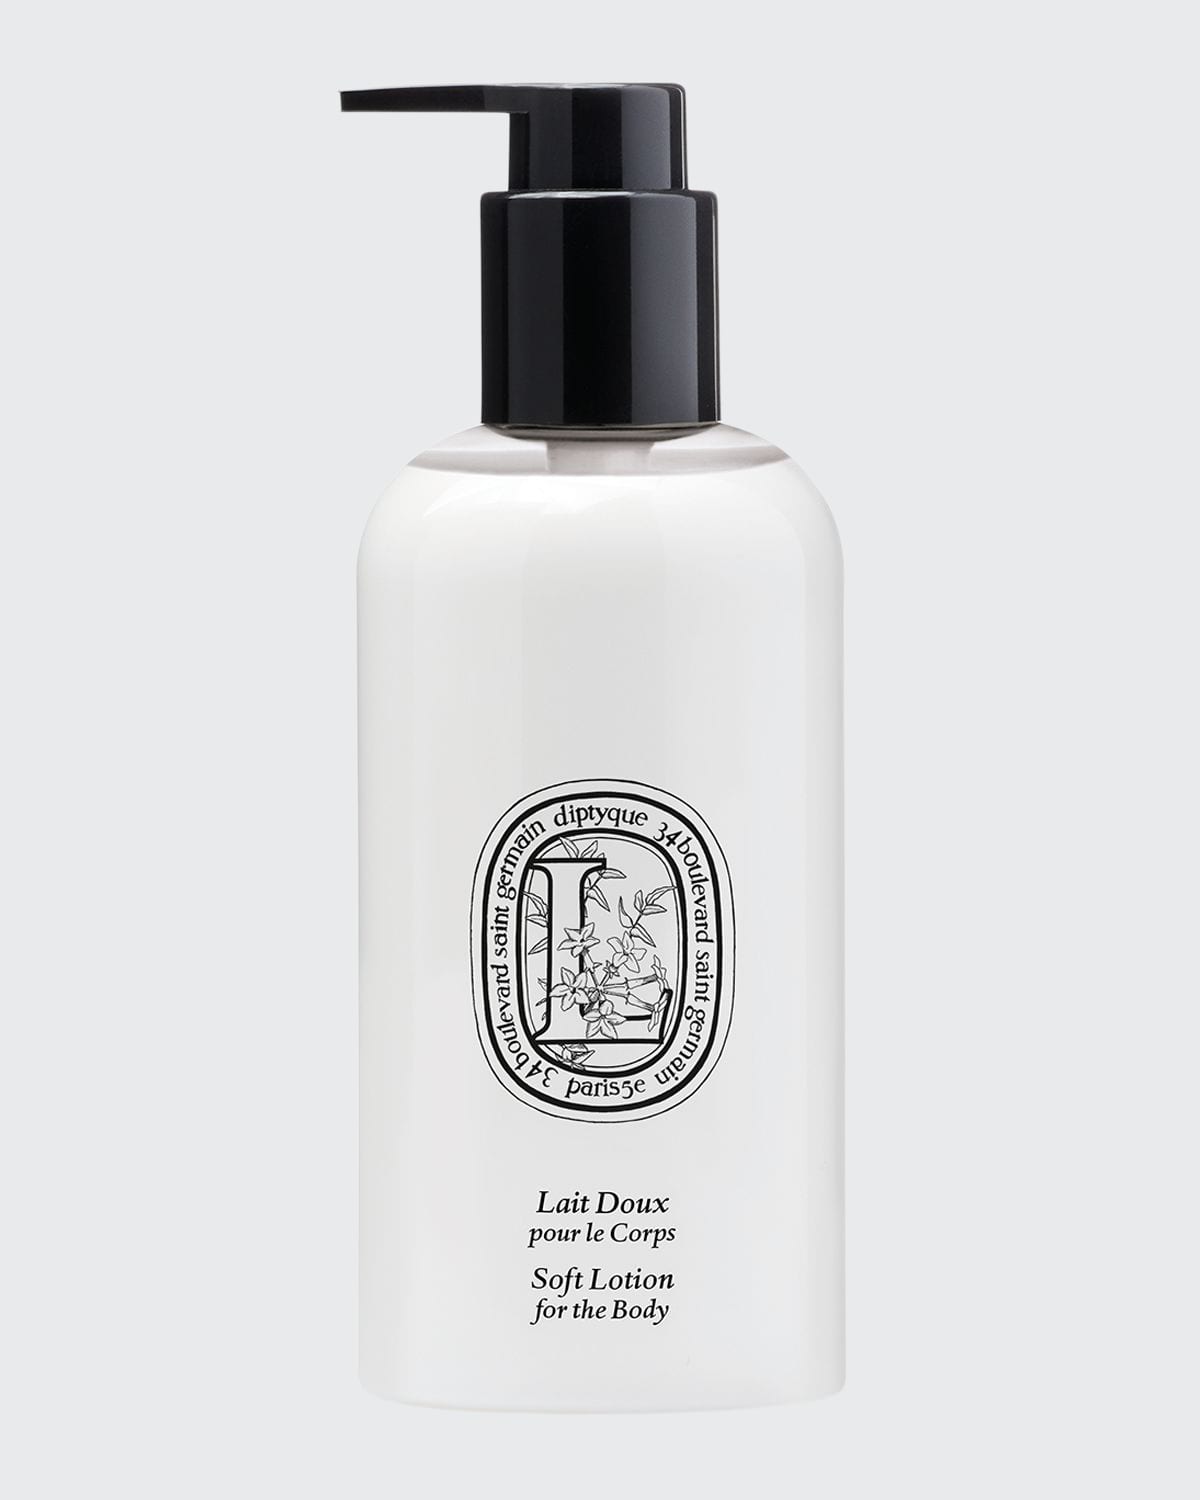 Diptyque 8.5 oz. Soft Lotion for the Body